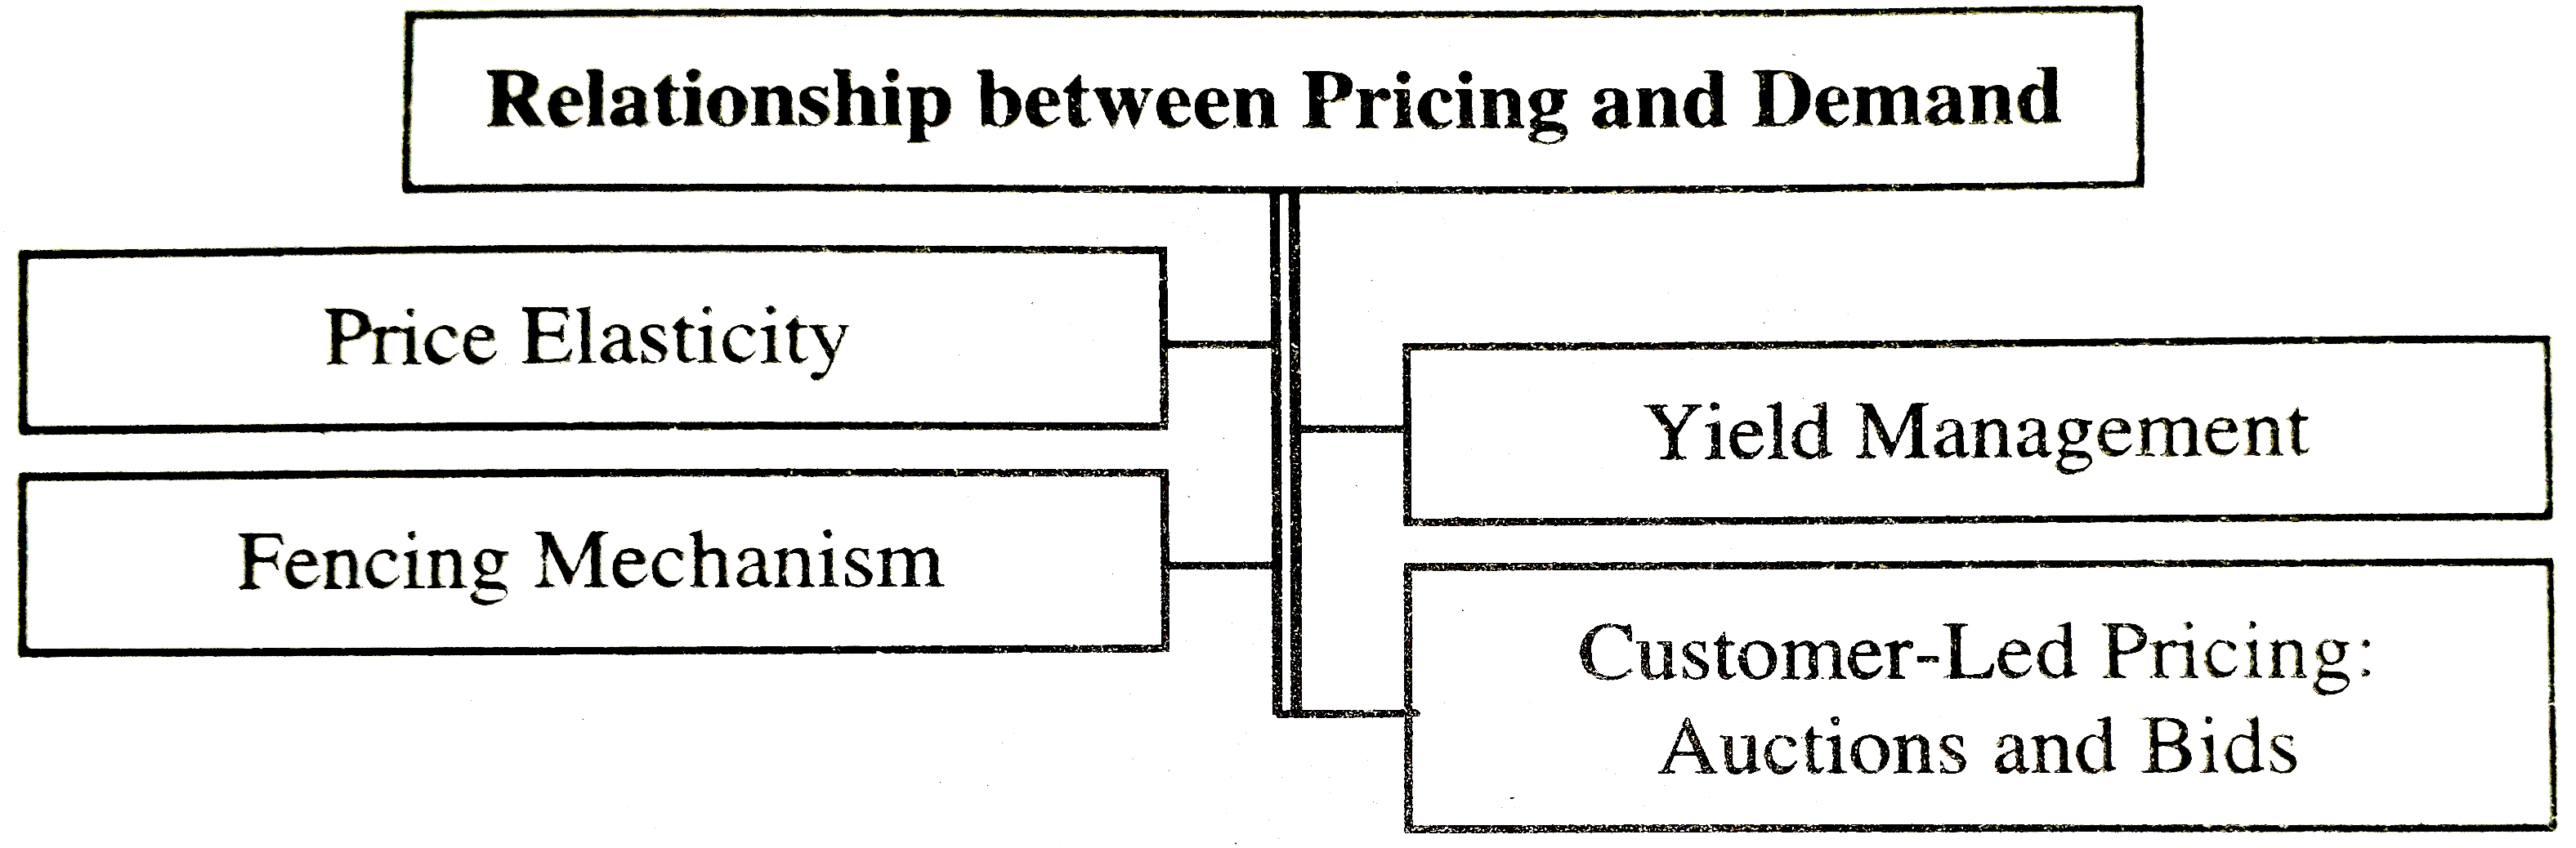 Relationship between Pricing and Demand